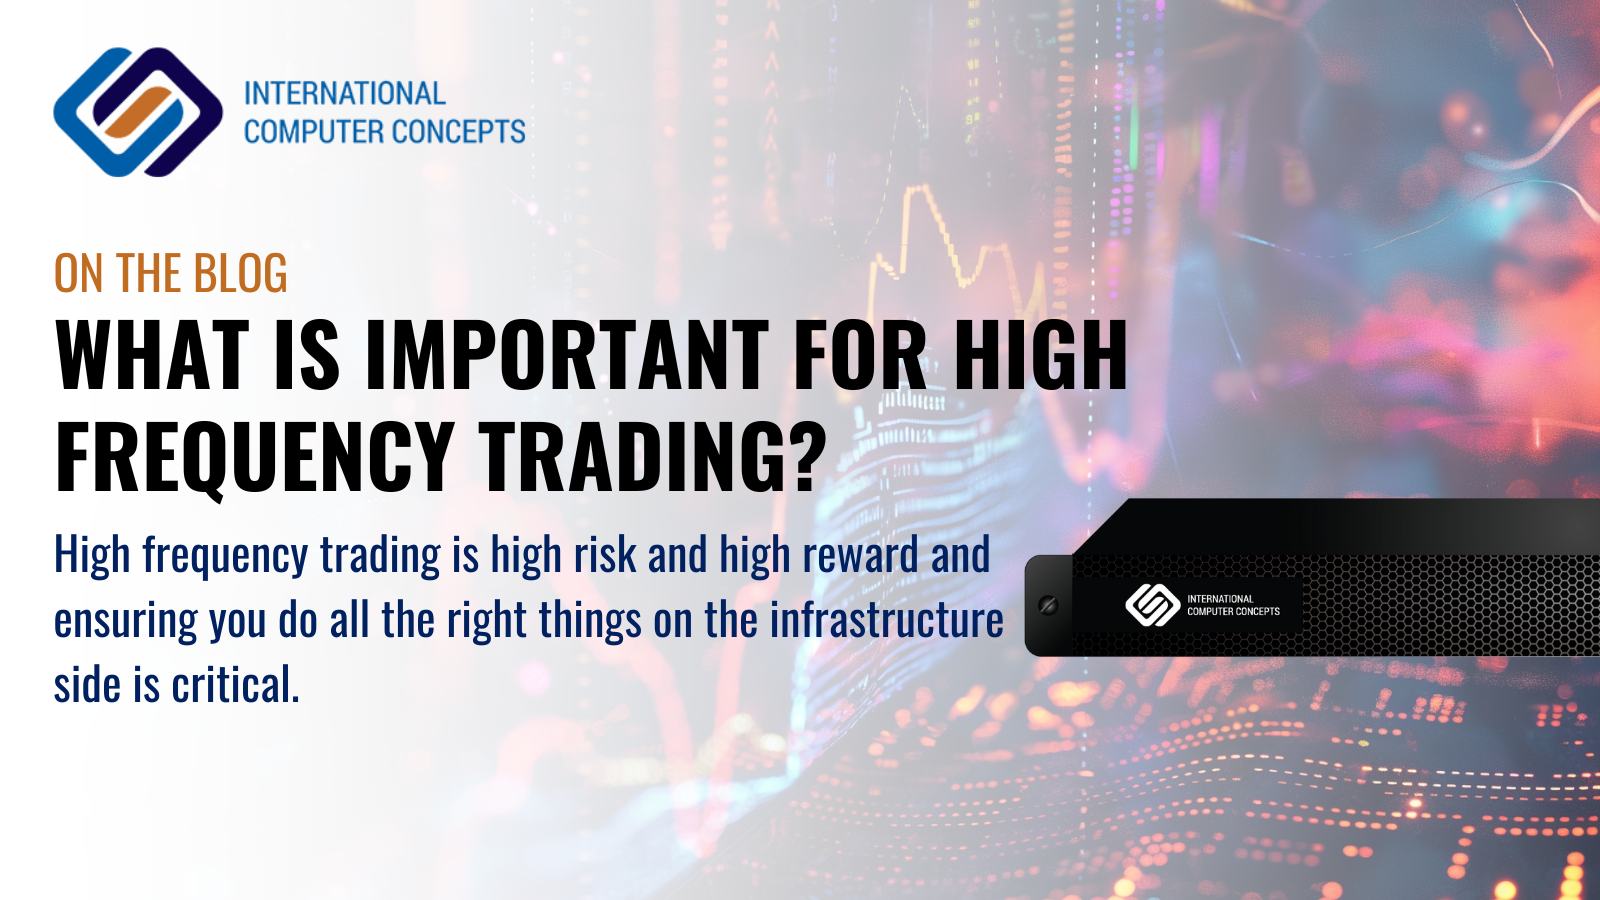 What is important for high frequency trading?